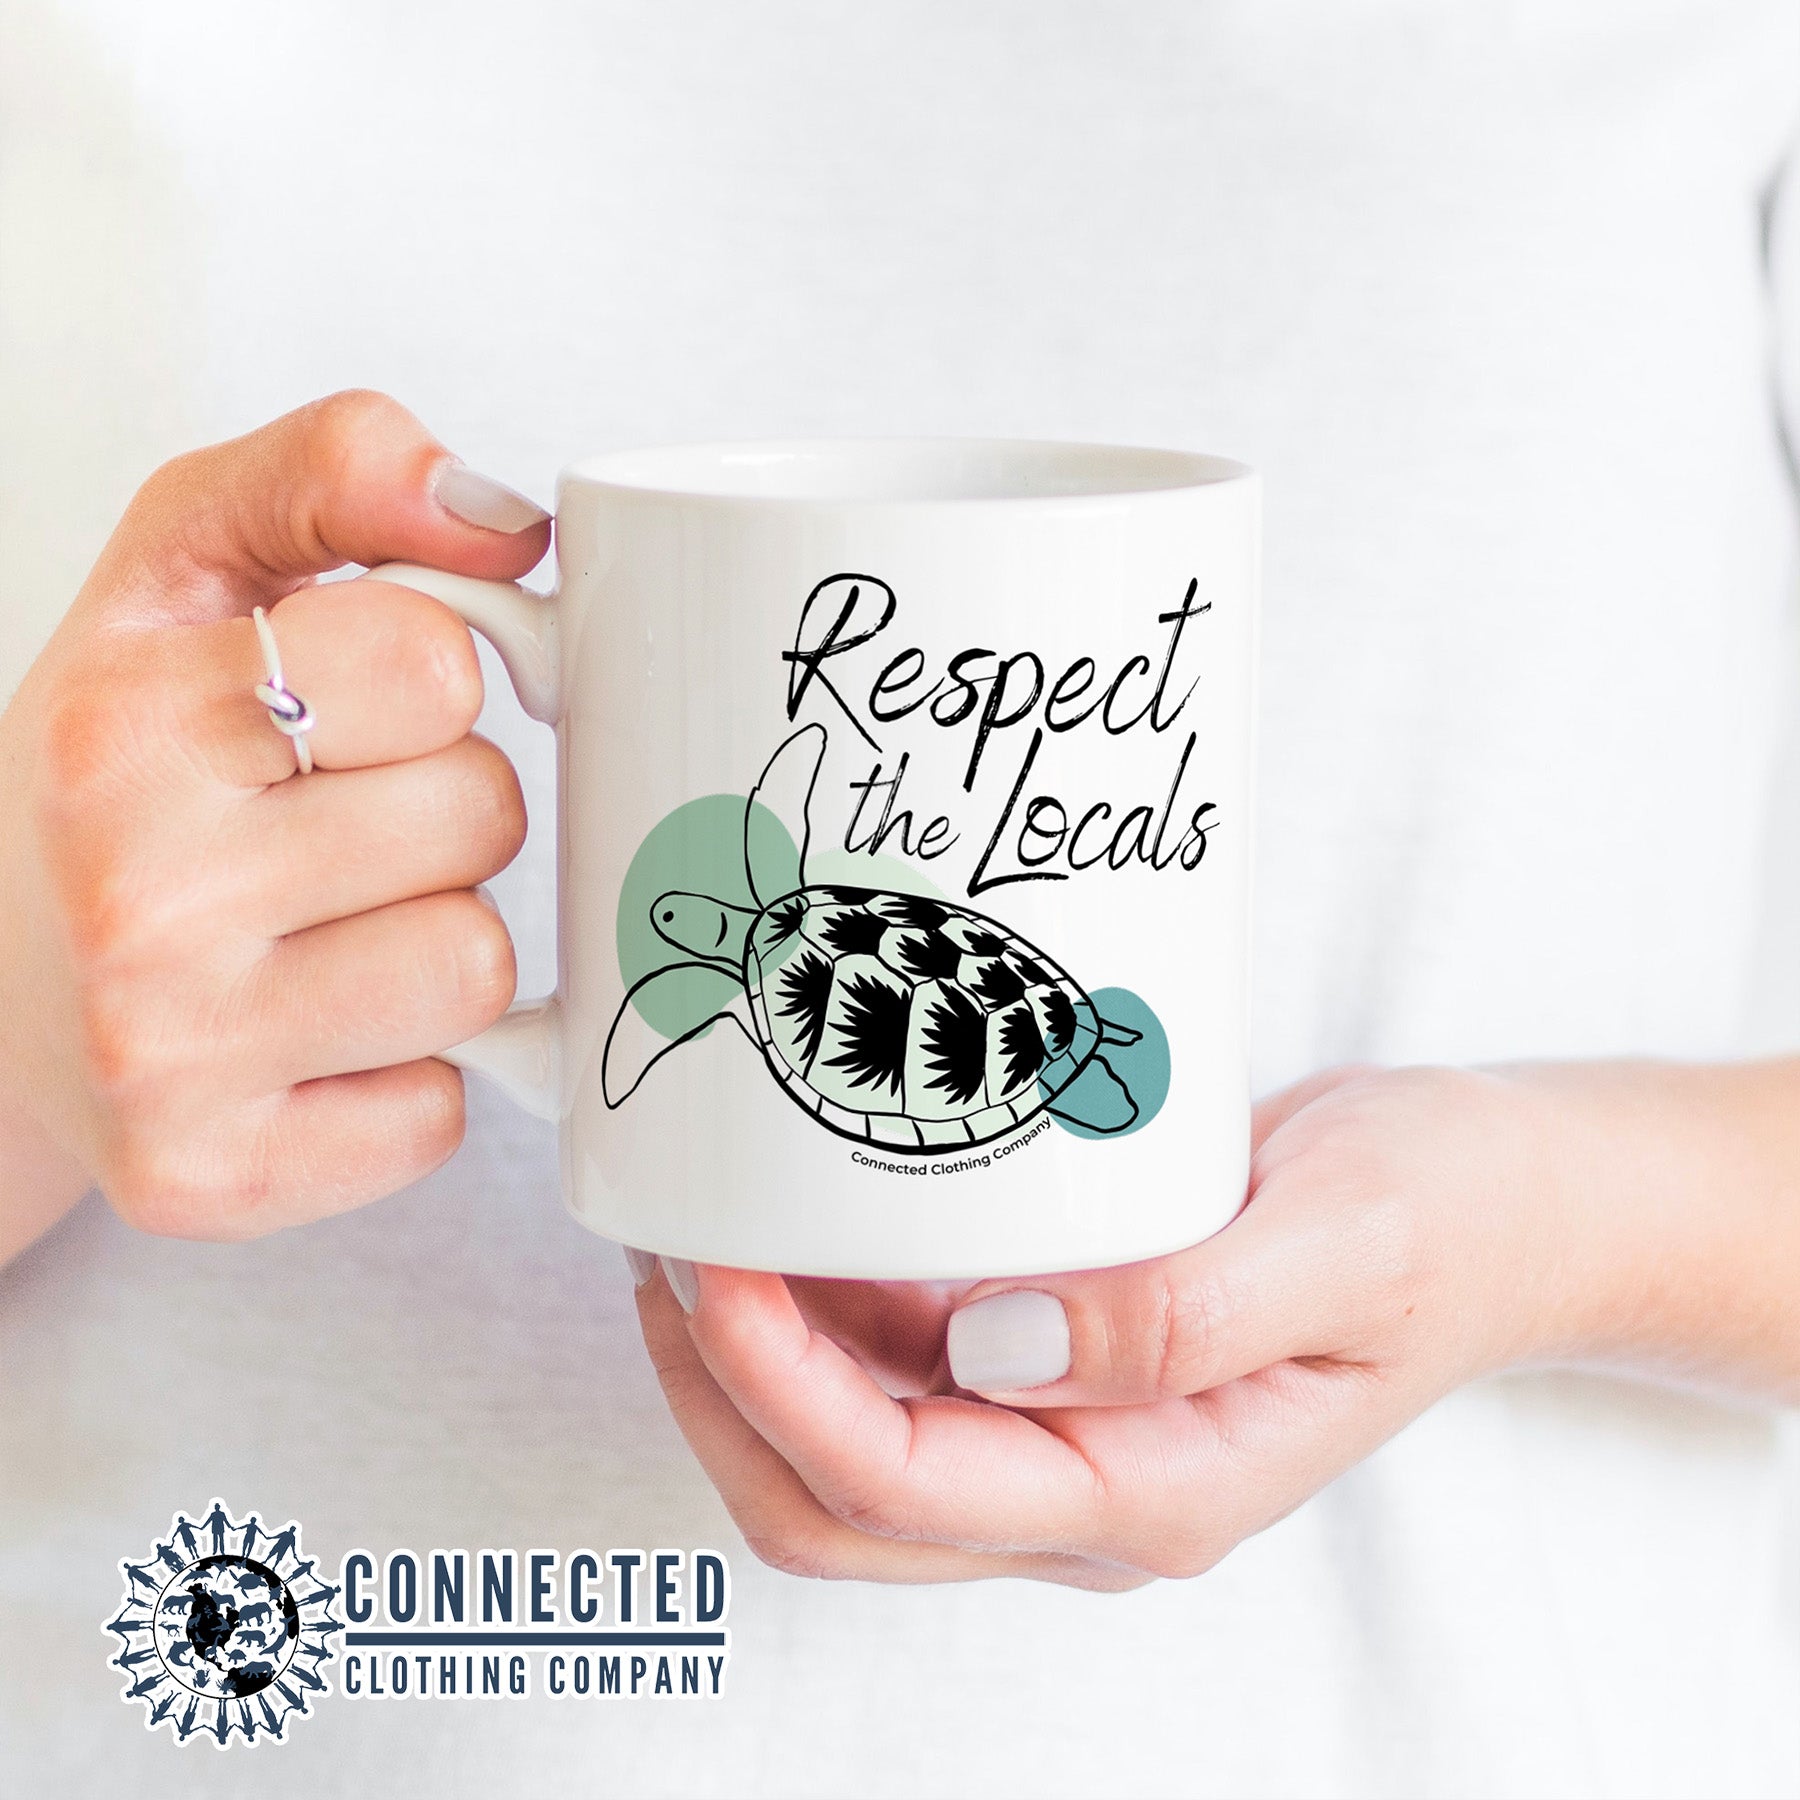 Respect The Locals Sea Turtle Mug - architectconstructor - 10% donated to sea turtle conservation